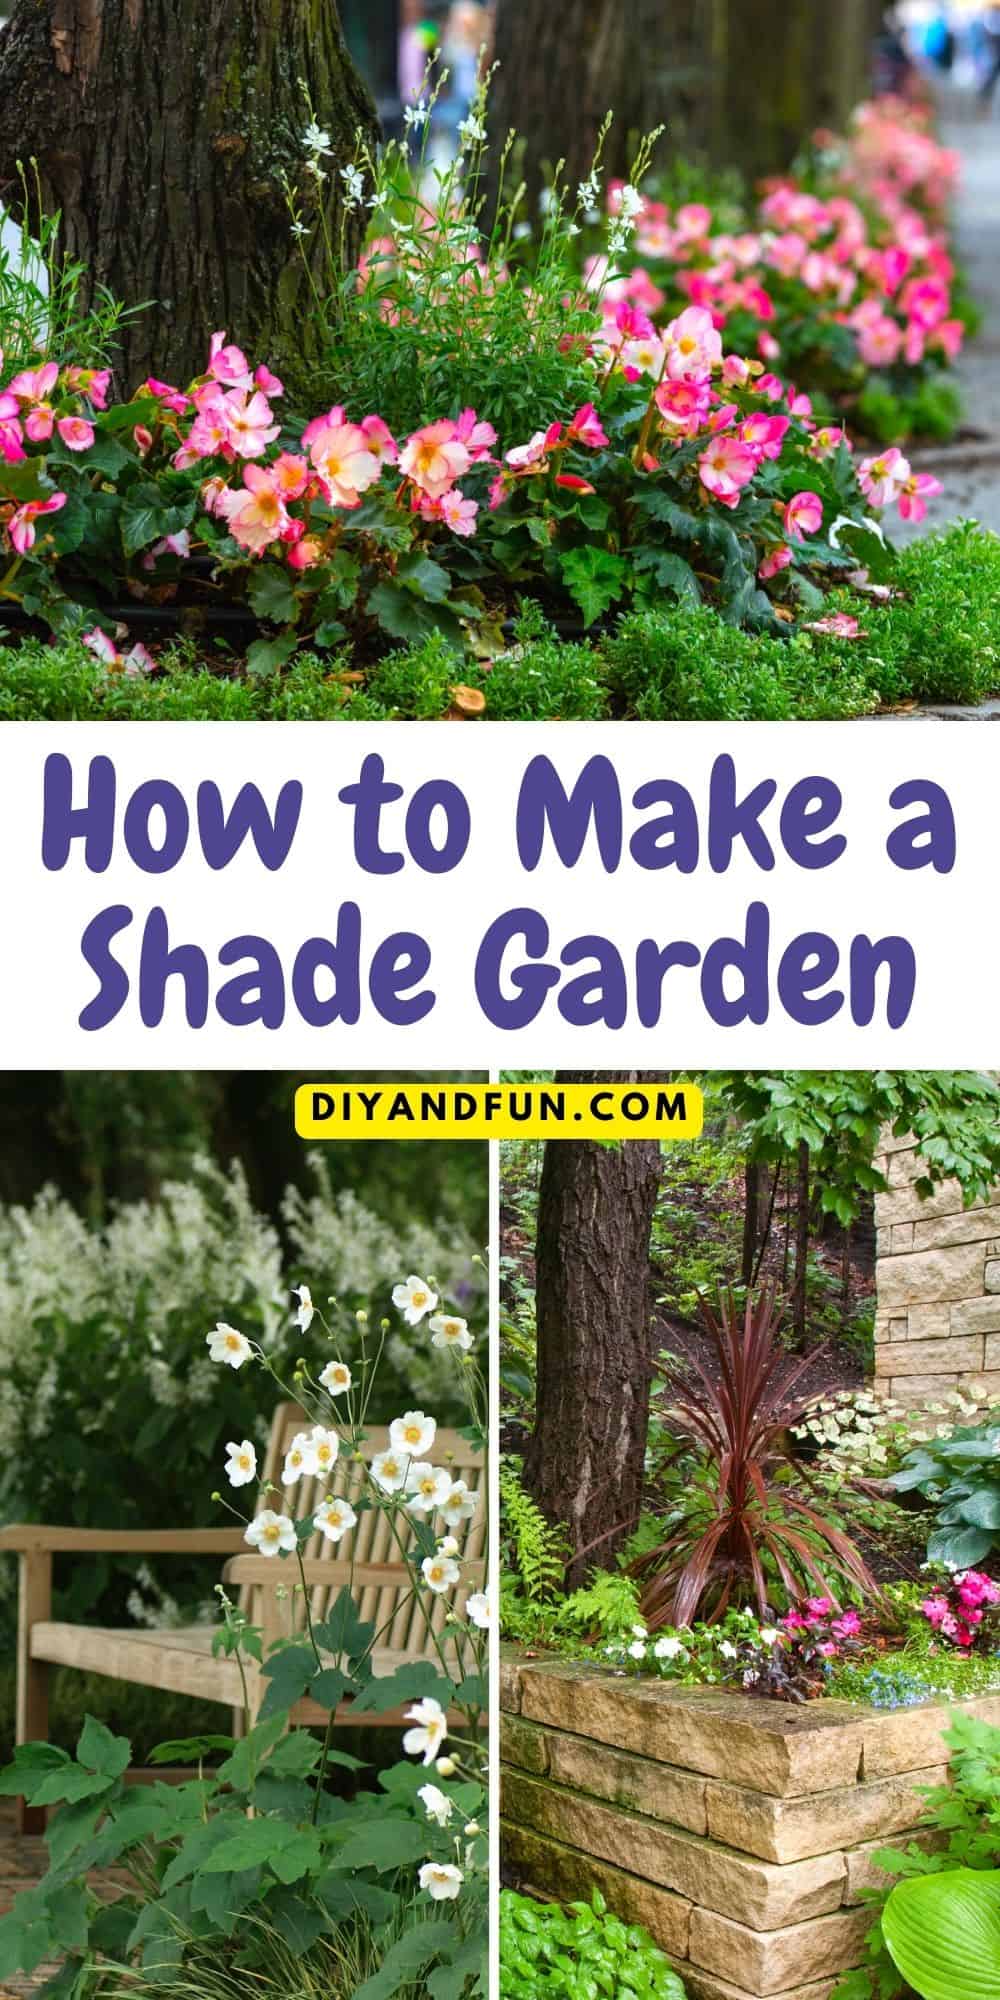 How to Make a Shade Garden, a simple guide for creating a garden with limited light, including shade-friendly plants and flowers. 